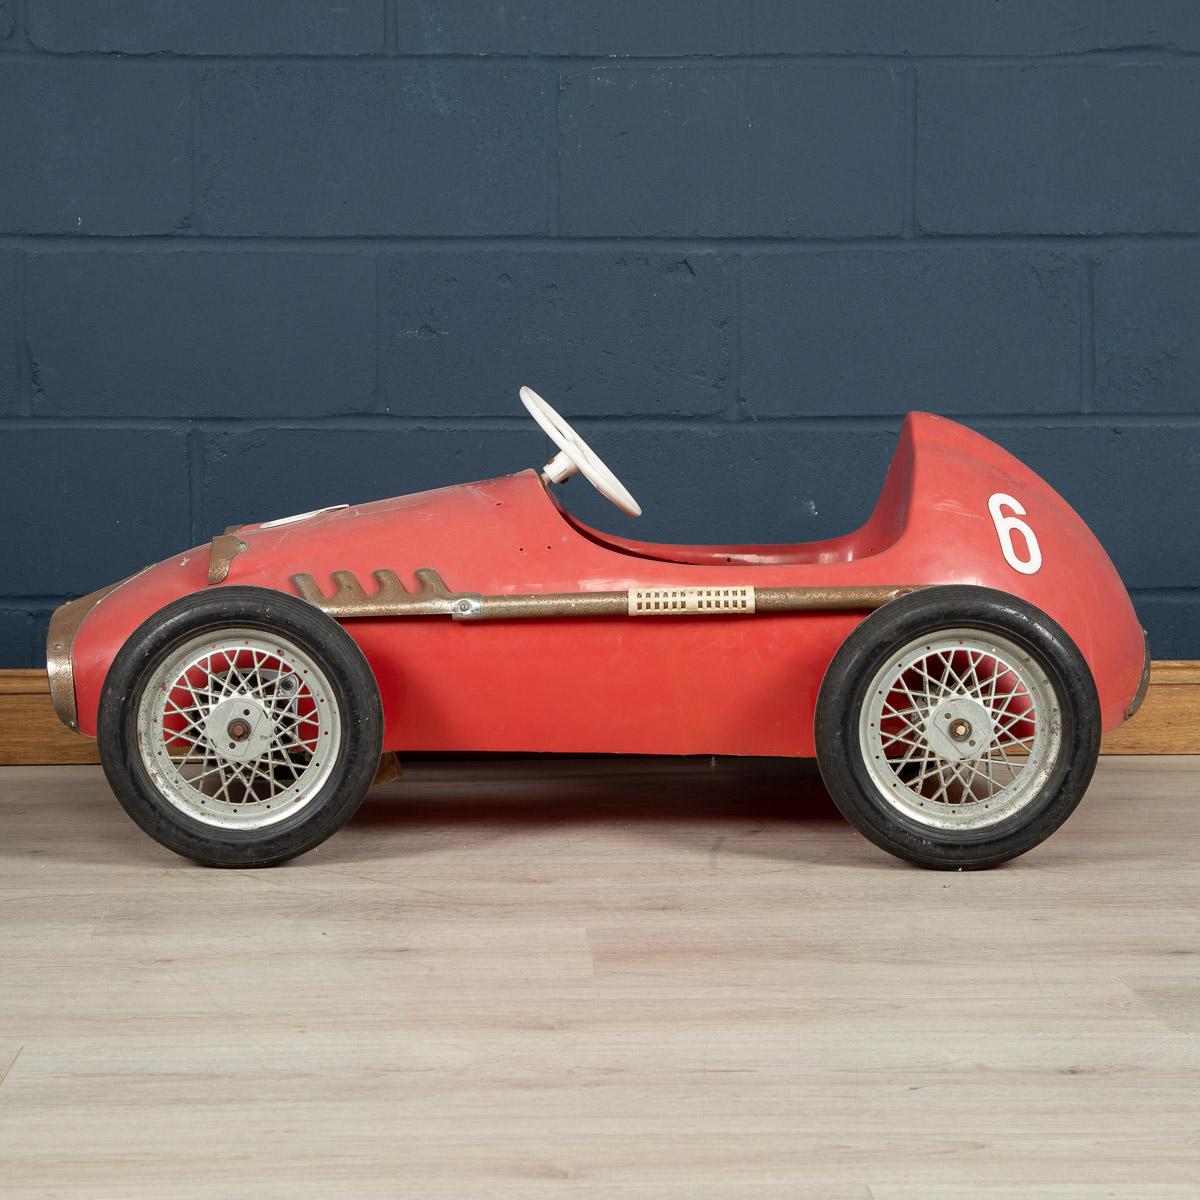 A pedal car, metal and fibreglass construction. Well used but oozes plenty of charm, honest and unrestored pedal car, “Carrera“ model, was realised by the world famous Pines Factory in Italy in the 1960s.

Please note that our interior pieces are